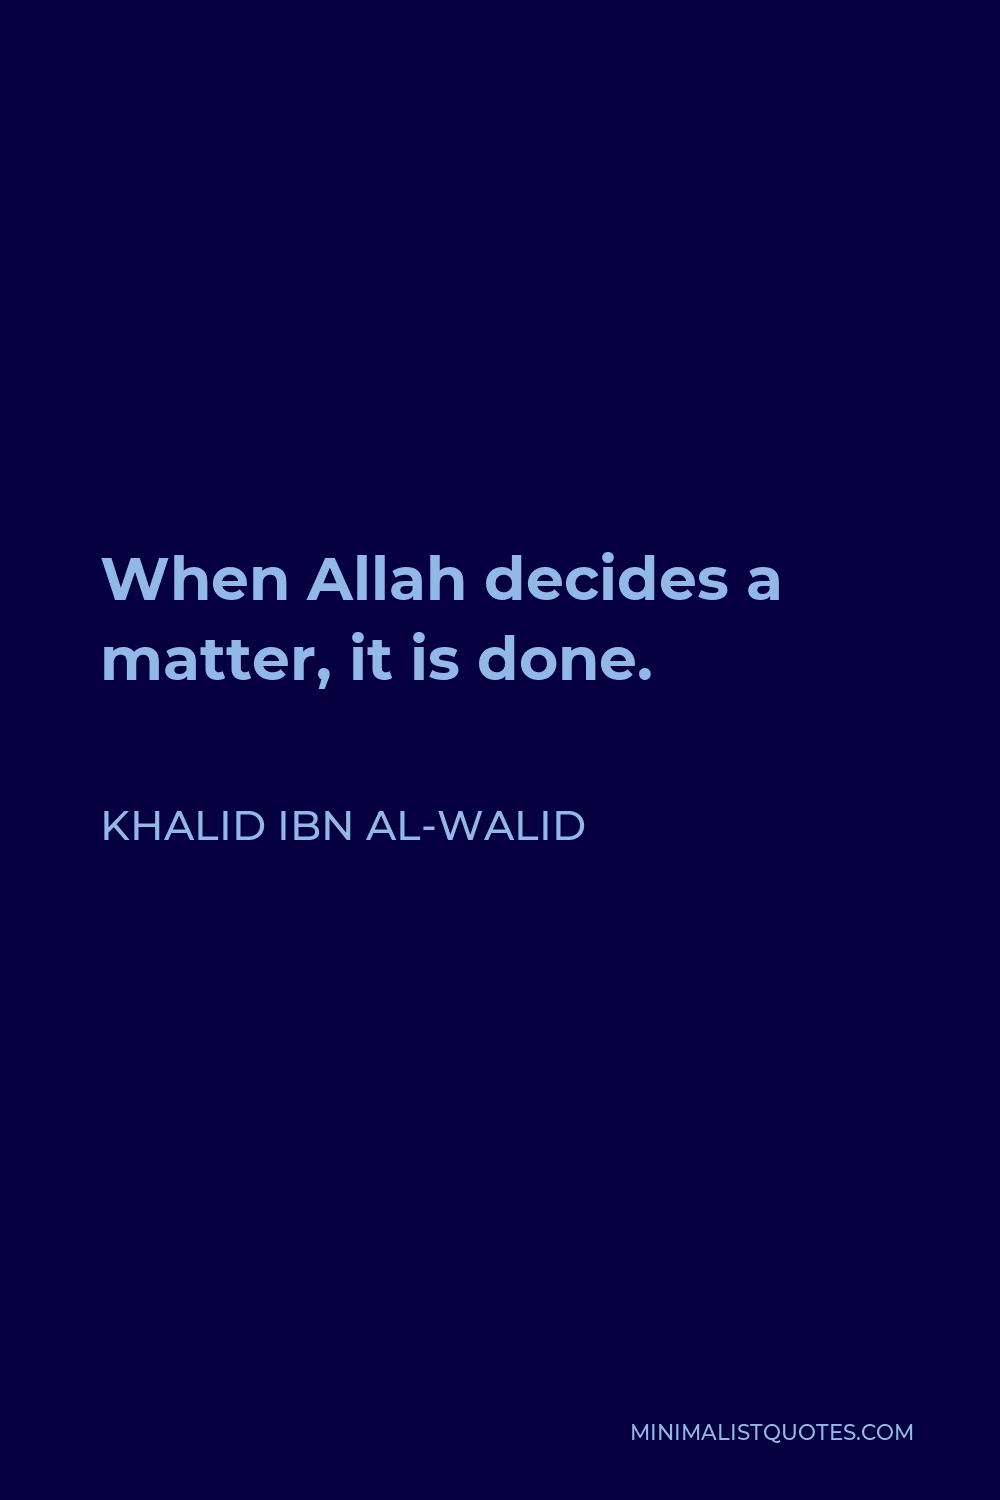 Khalid ibn al-Walid Quote - When Allah decides a matter, it is done.